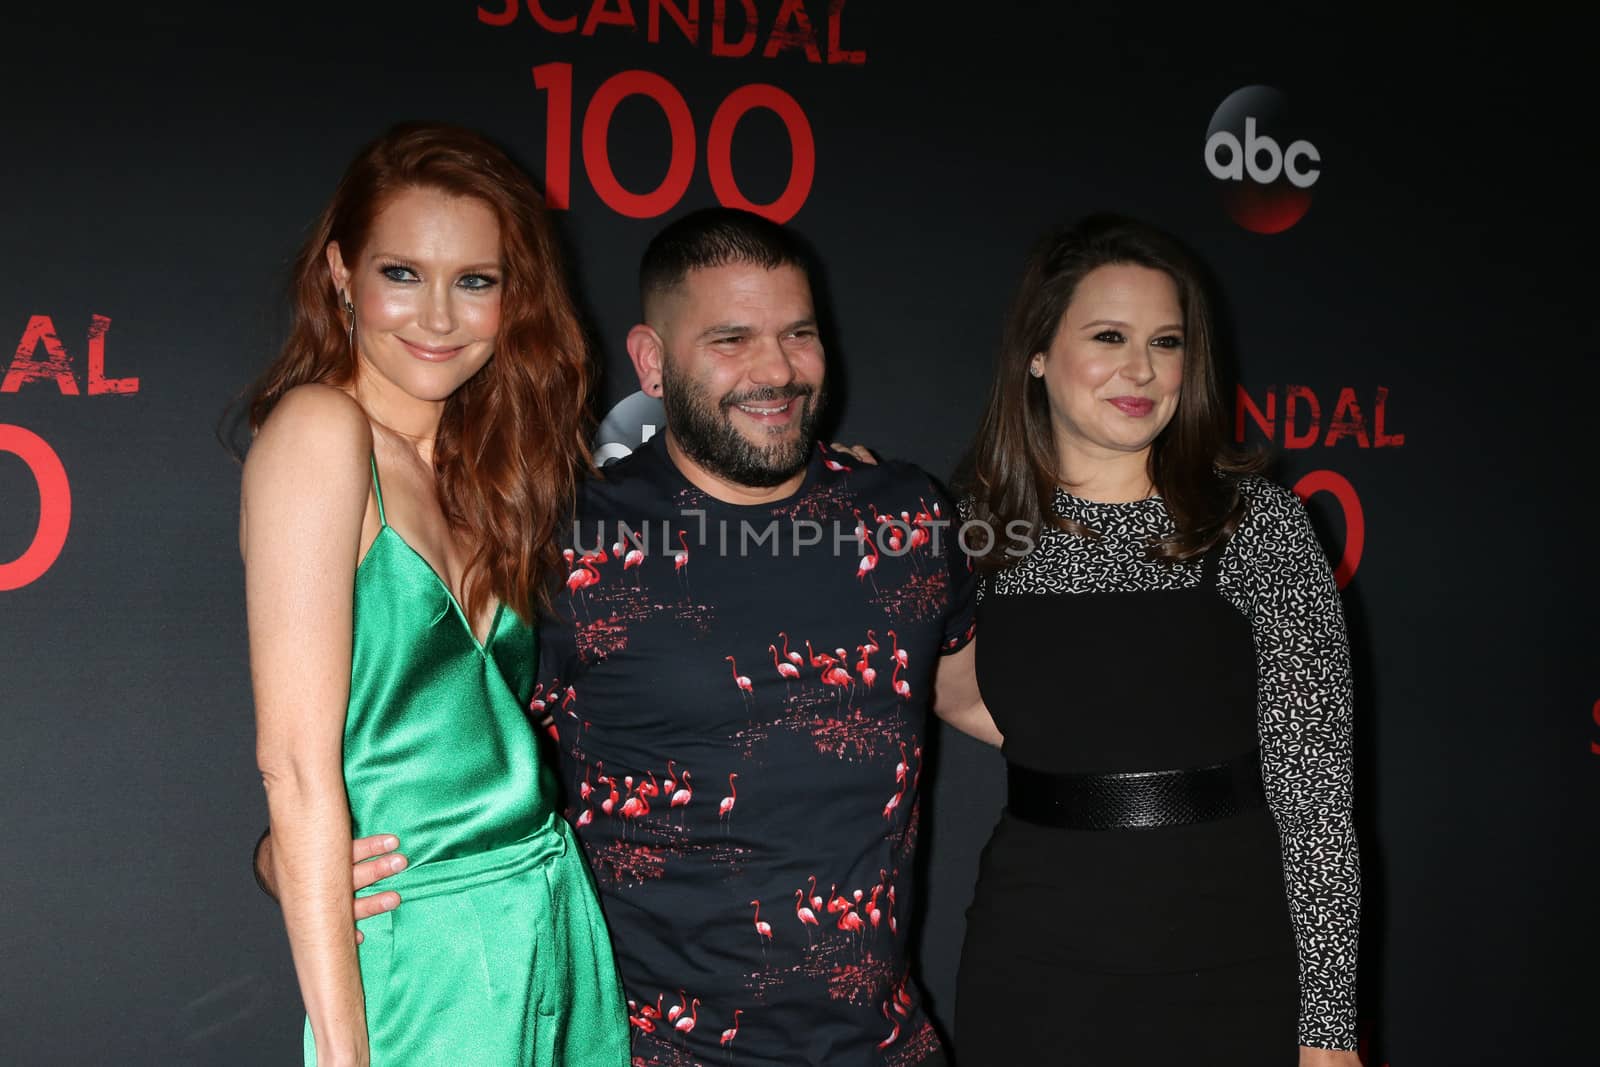 Darby Stanchfield, Katie Lowes, Guillermo Diaz
at the "Scandal" 100th Show Party, Fig & Olive Restaurant, West Hollywood, CA 04-08-17